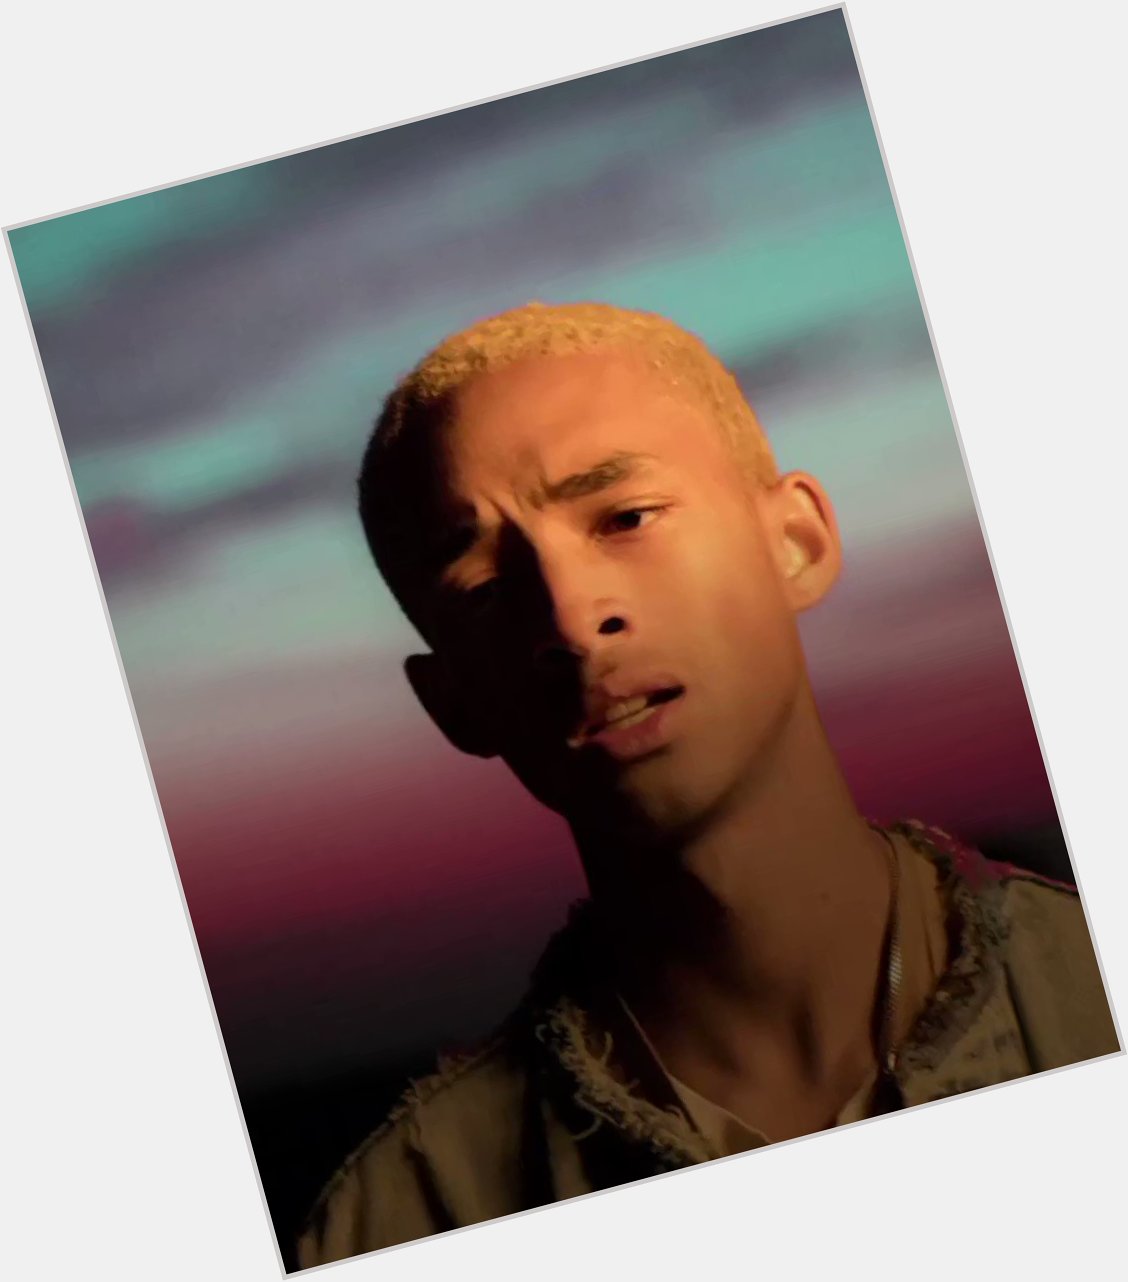 Jaden Smith celebrated his 20th by releasing an album.

Happy birthday, 